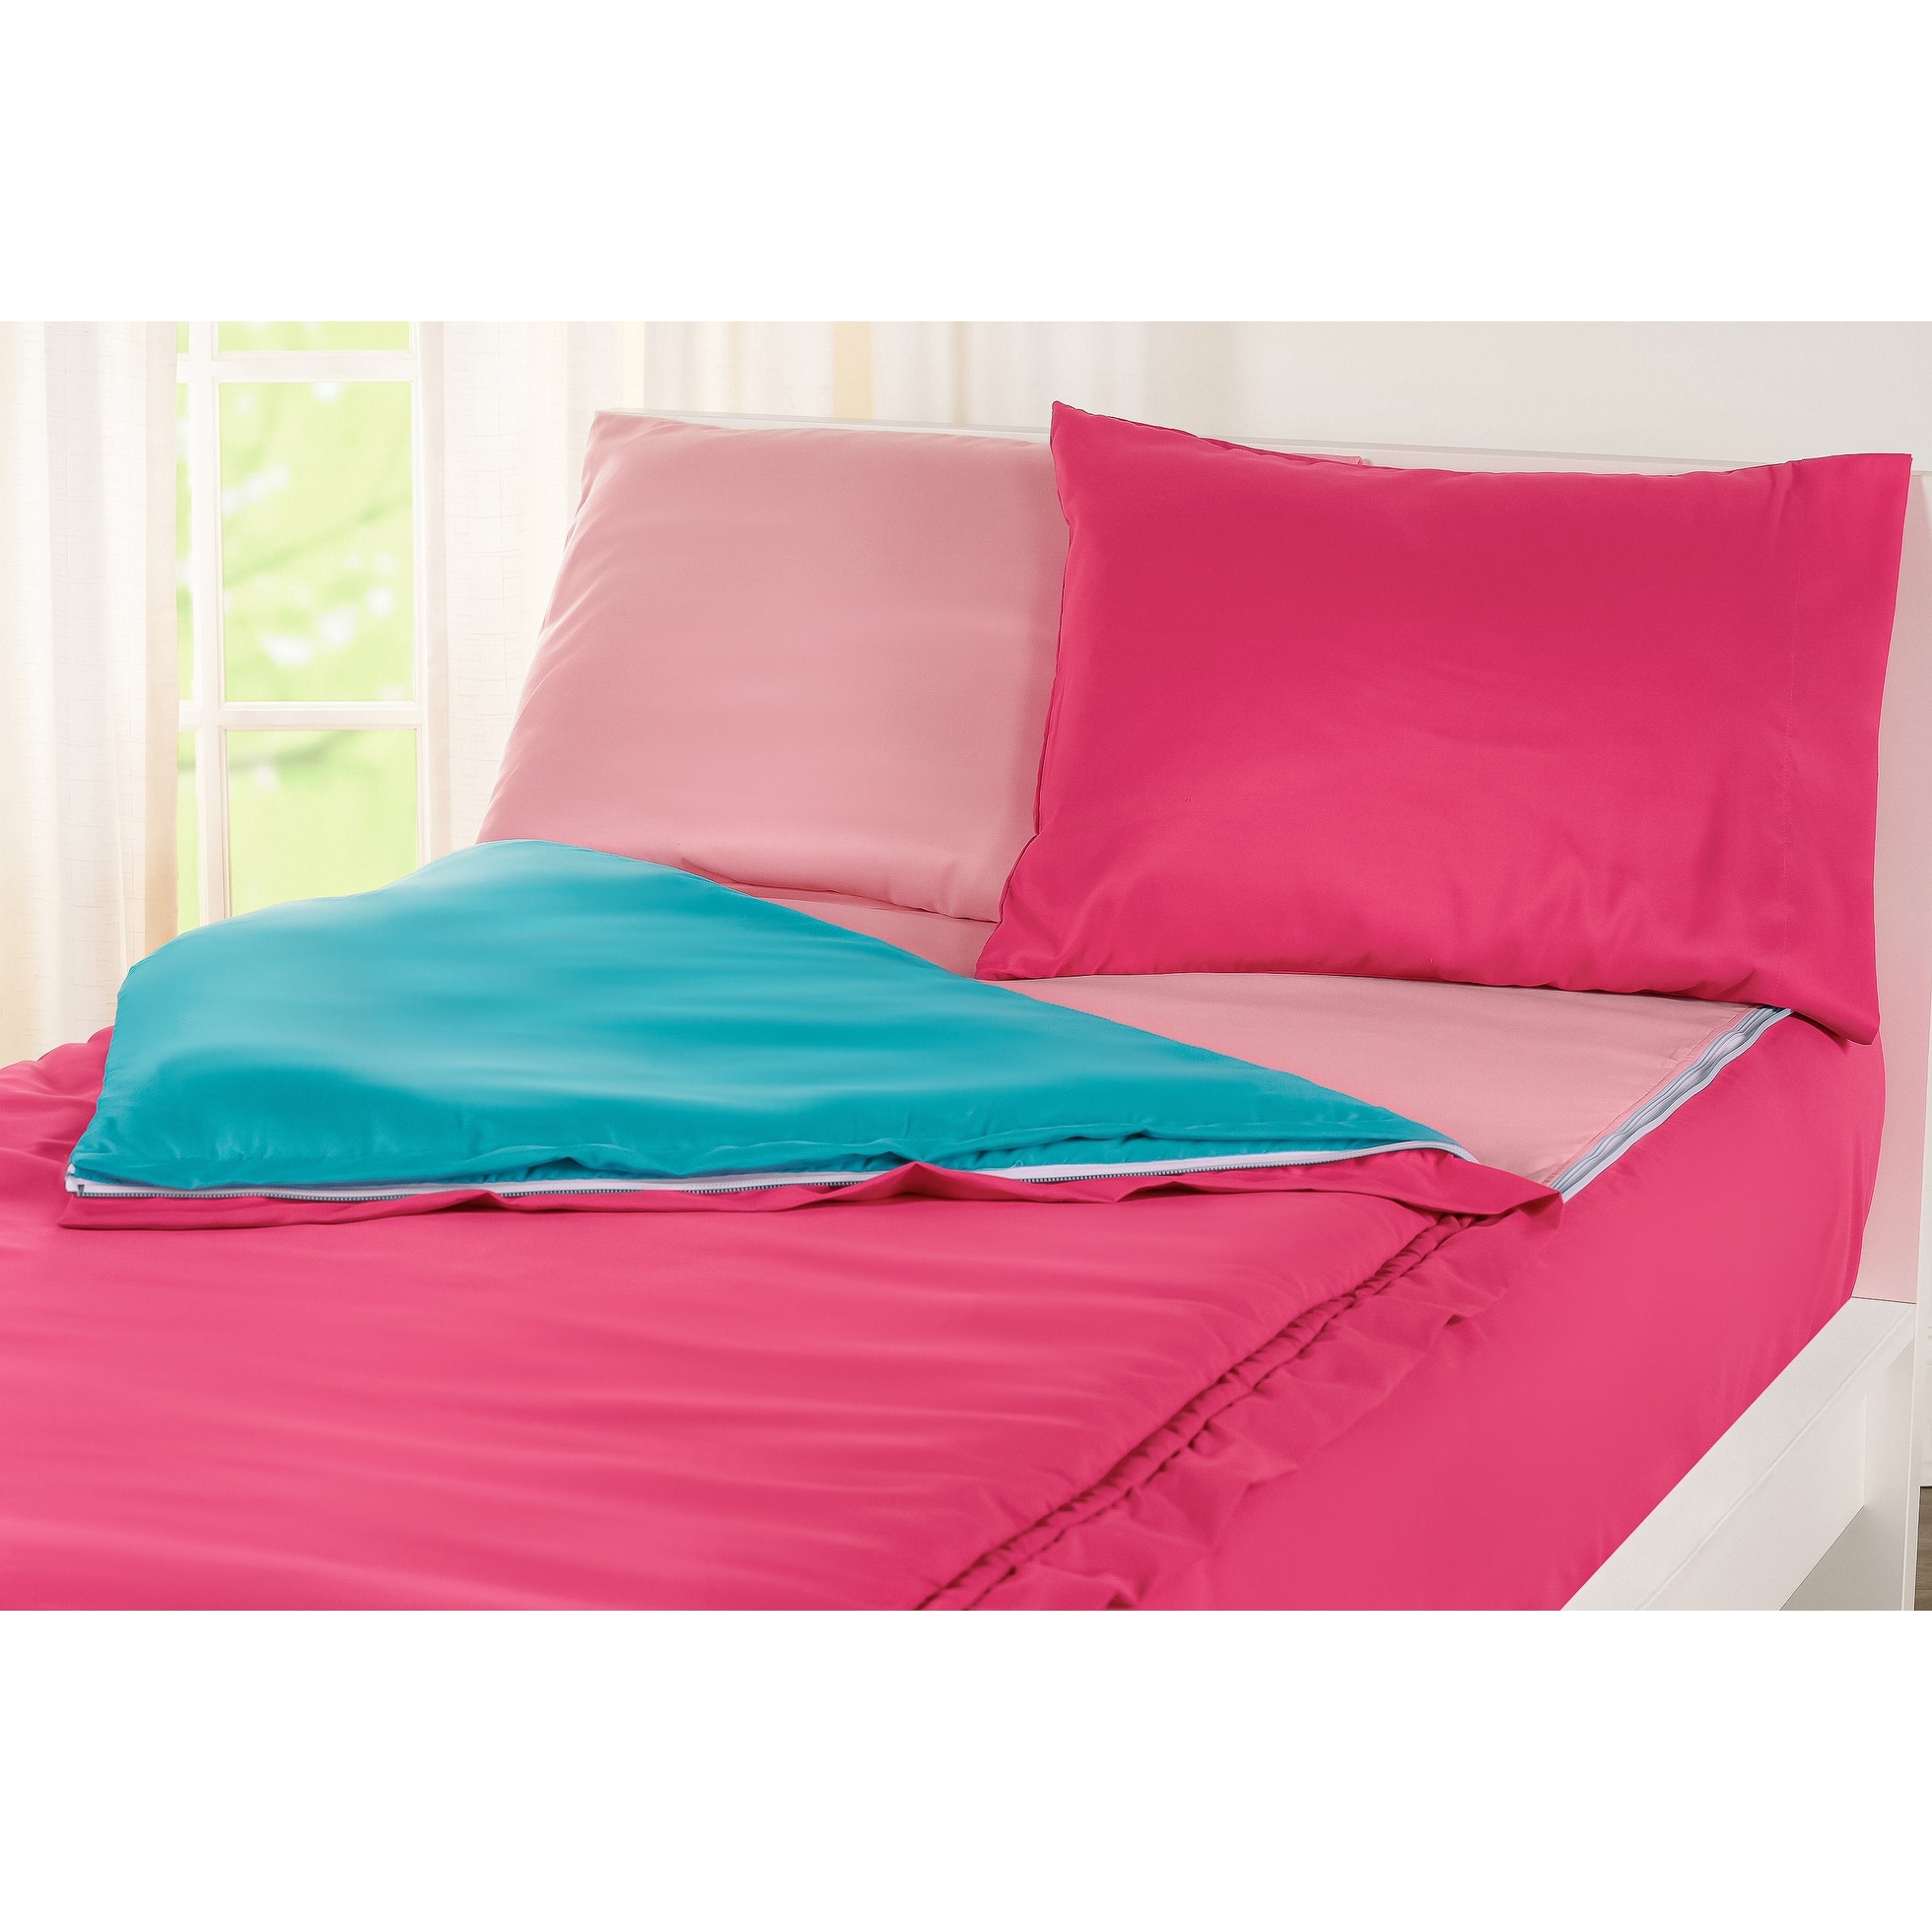 Beddy's Mason All Cotton, All-in-One Zipper Bed Set, Twin